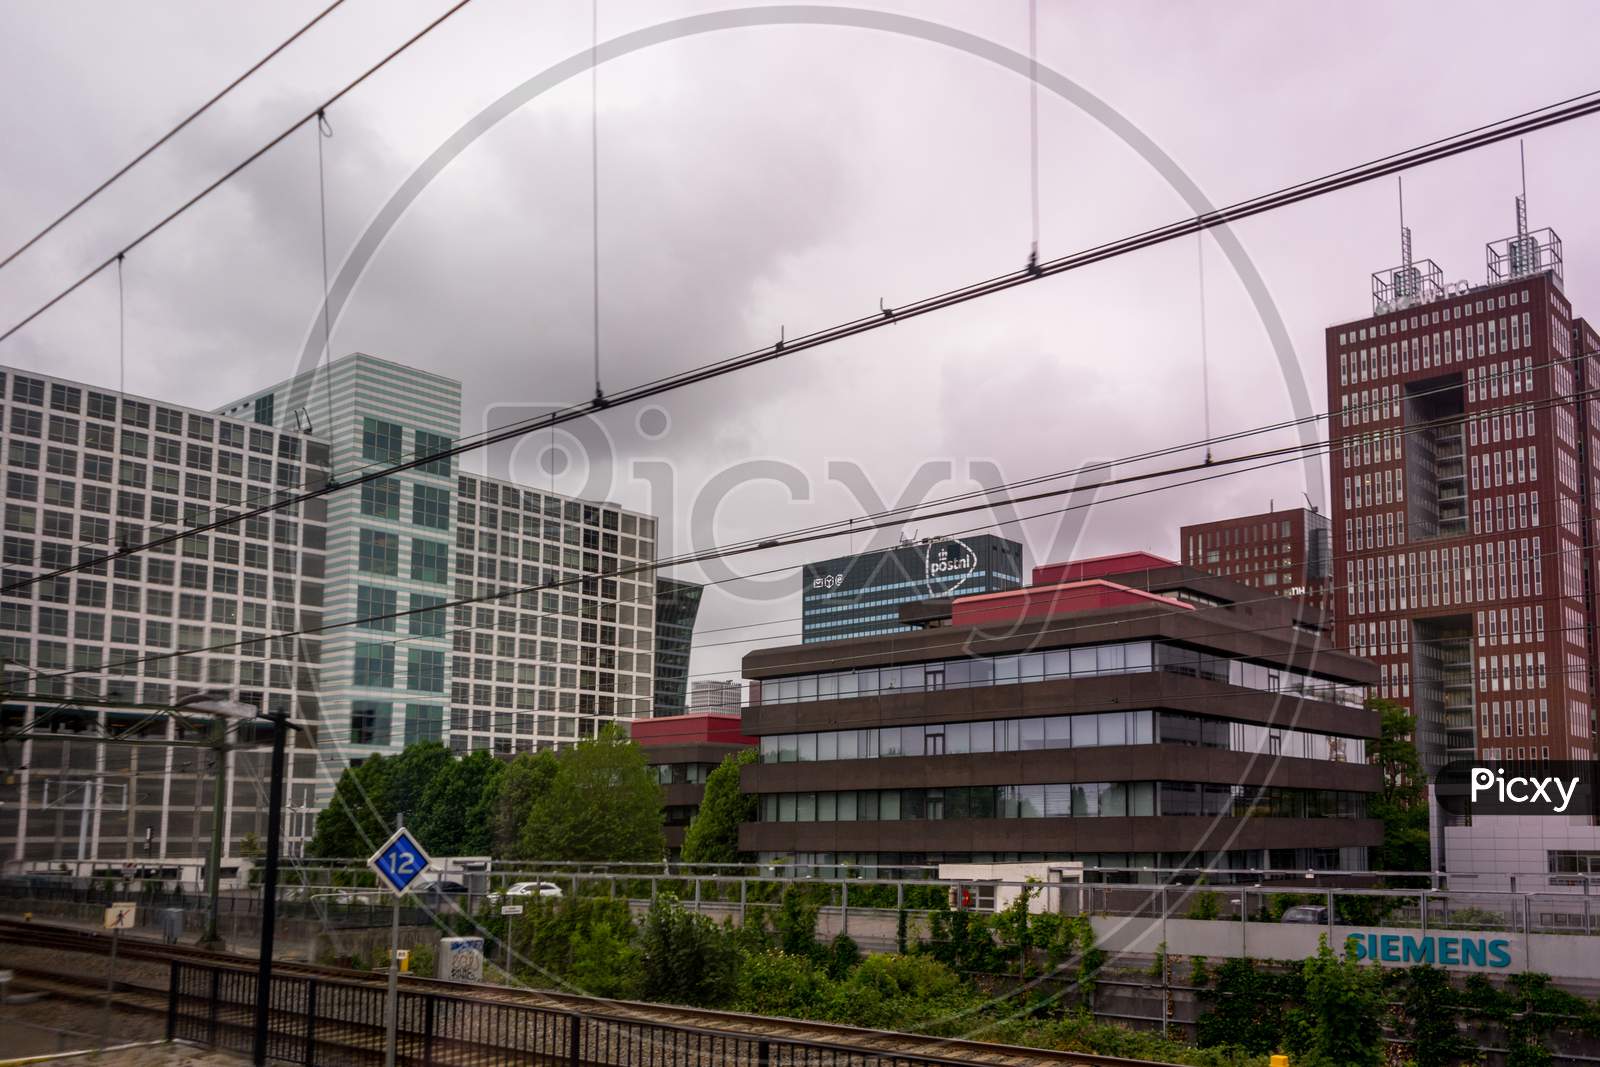 Den Haag, 22 June 2018: The Post Nl And Siemens Building Viewed From Den Haag Central Railway Station